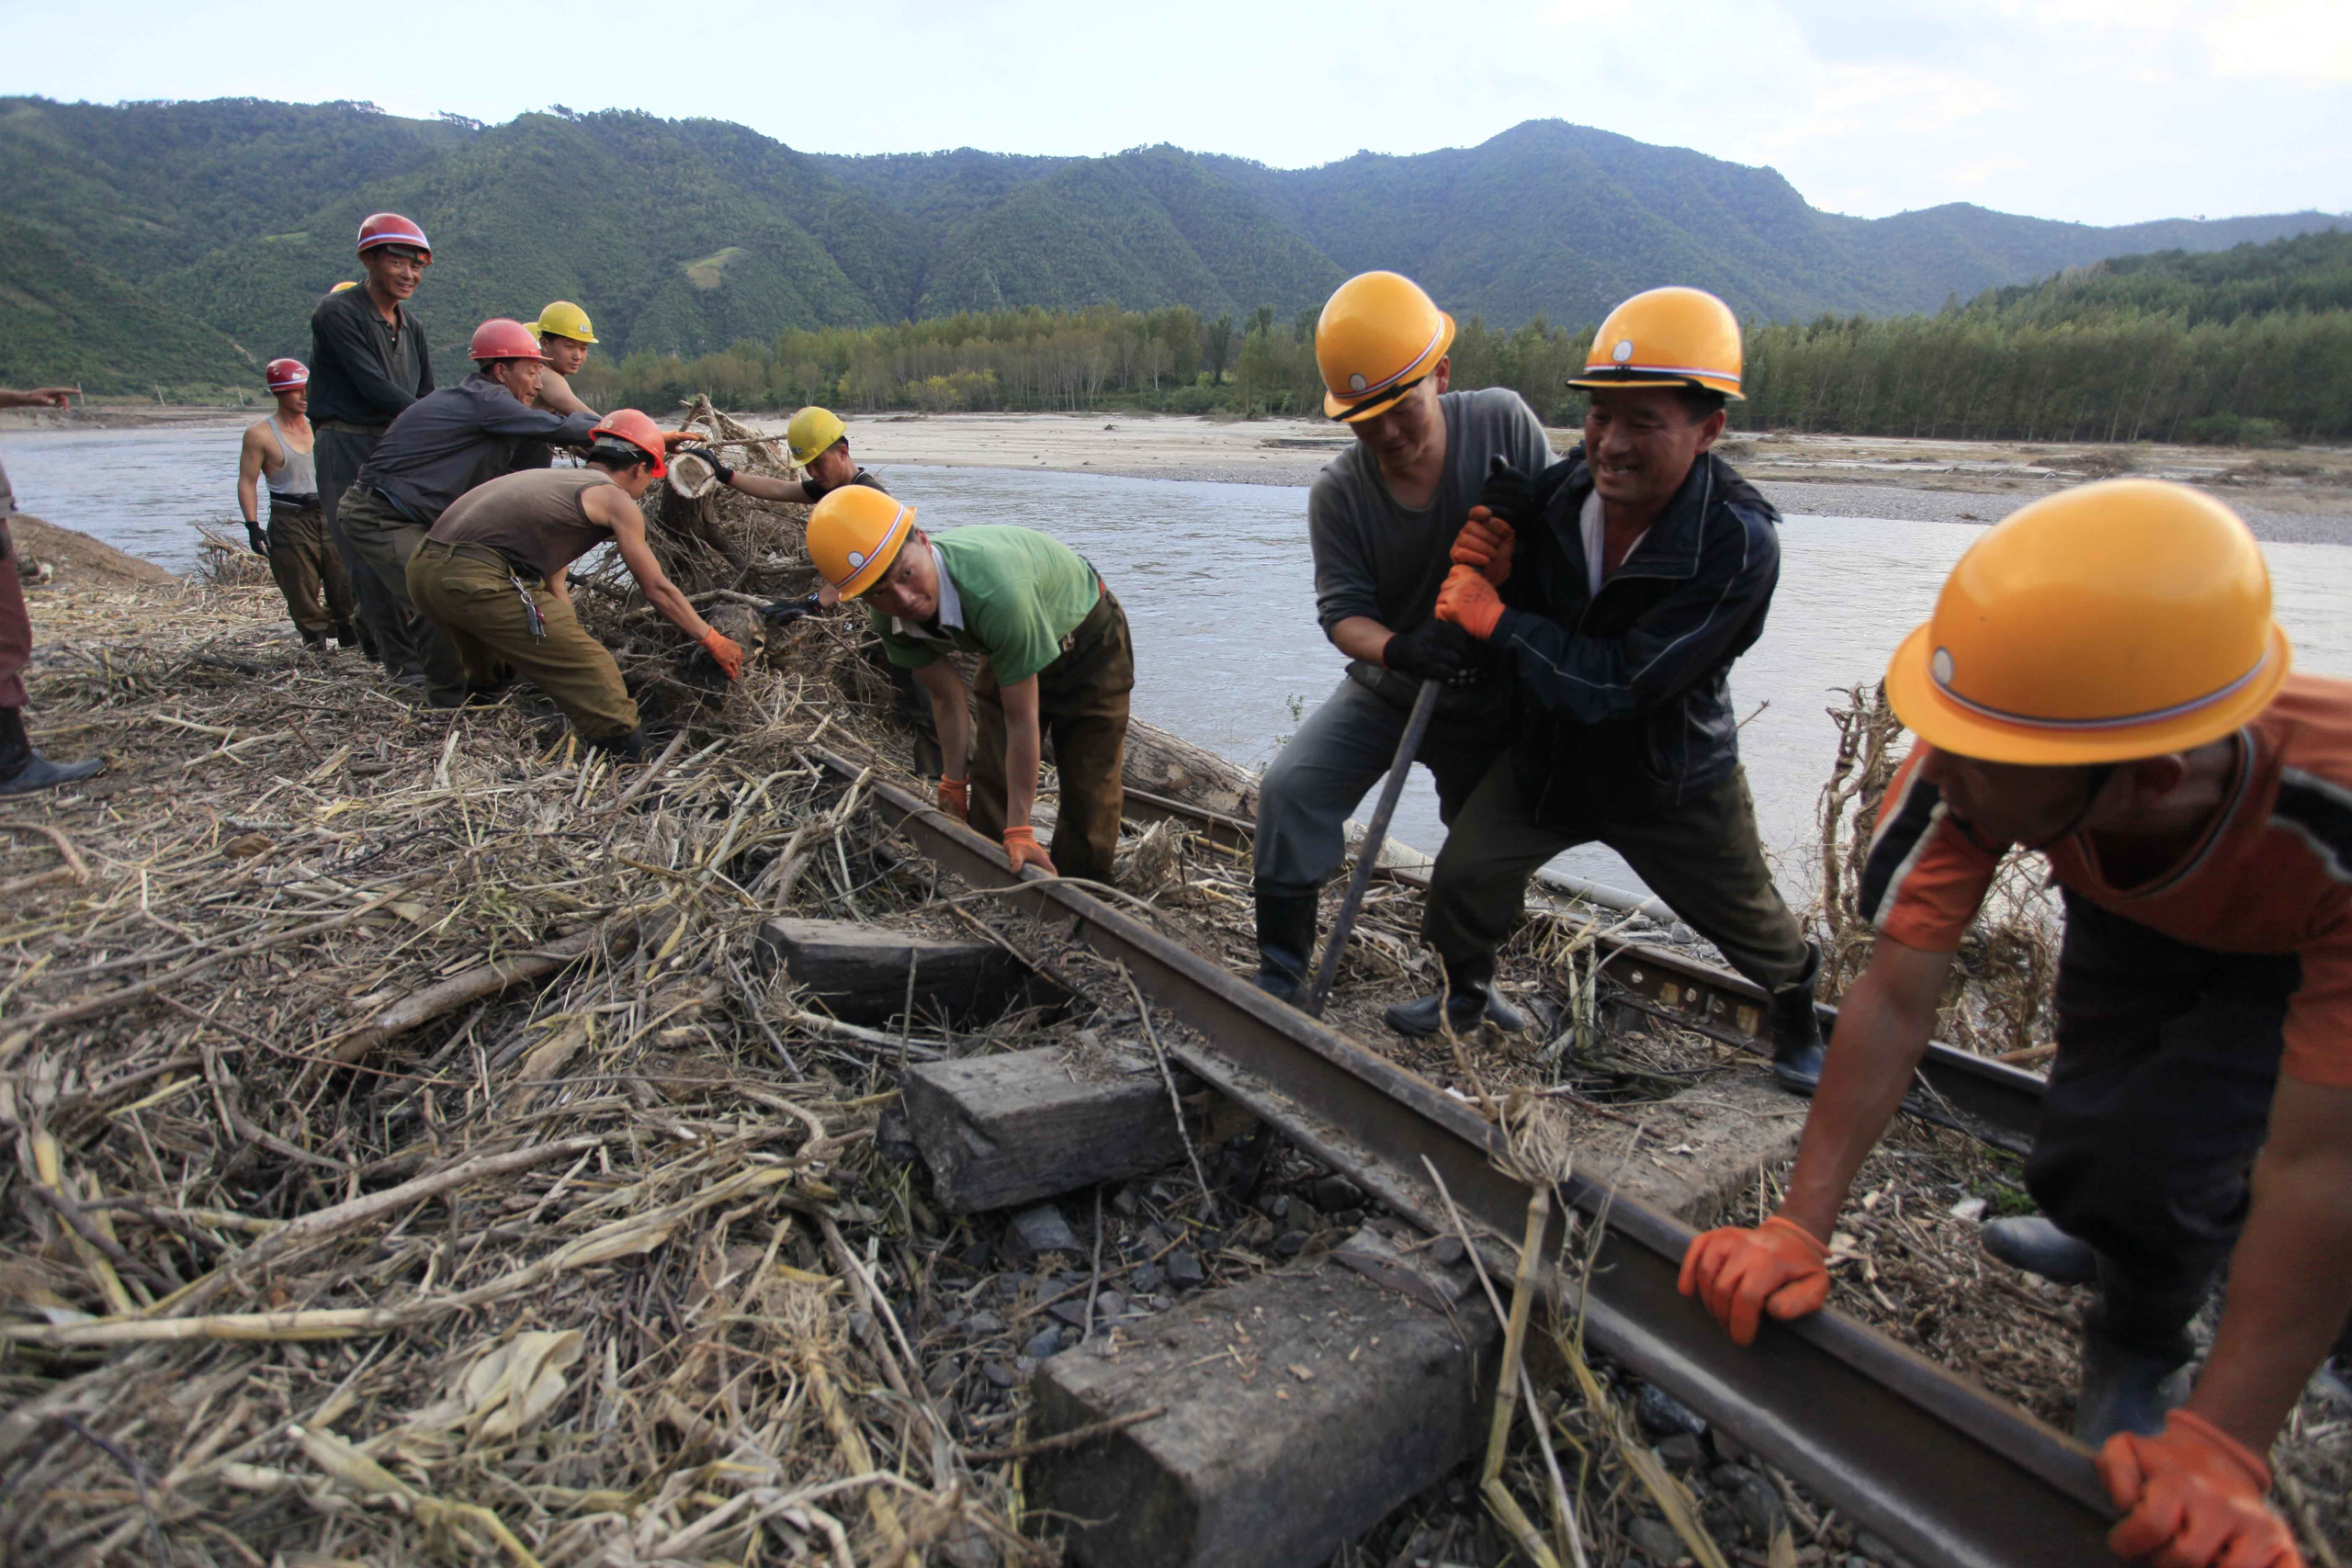 Workers repair the flood-damaged train track between Sinjon and Kanphyong train stations in North Hamgyong Province, North Korea, on Sept. 16, 2016. (Kim Kwang Hyon—AP)